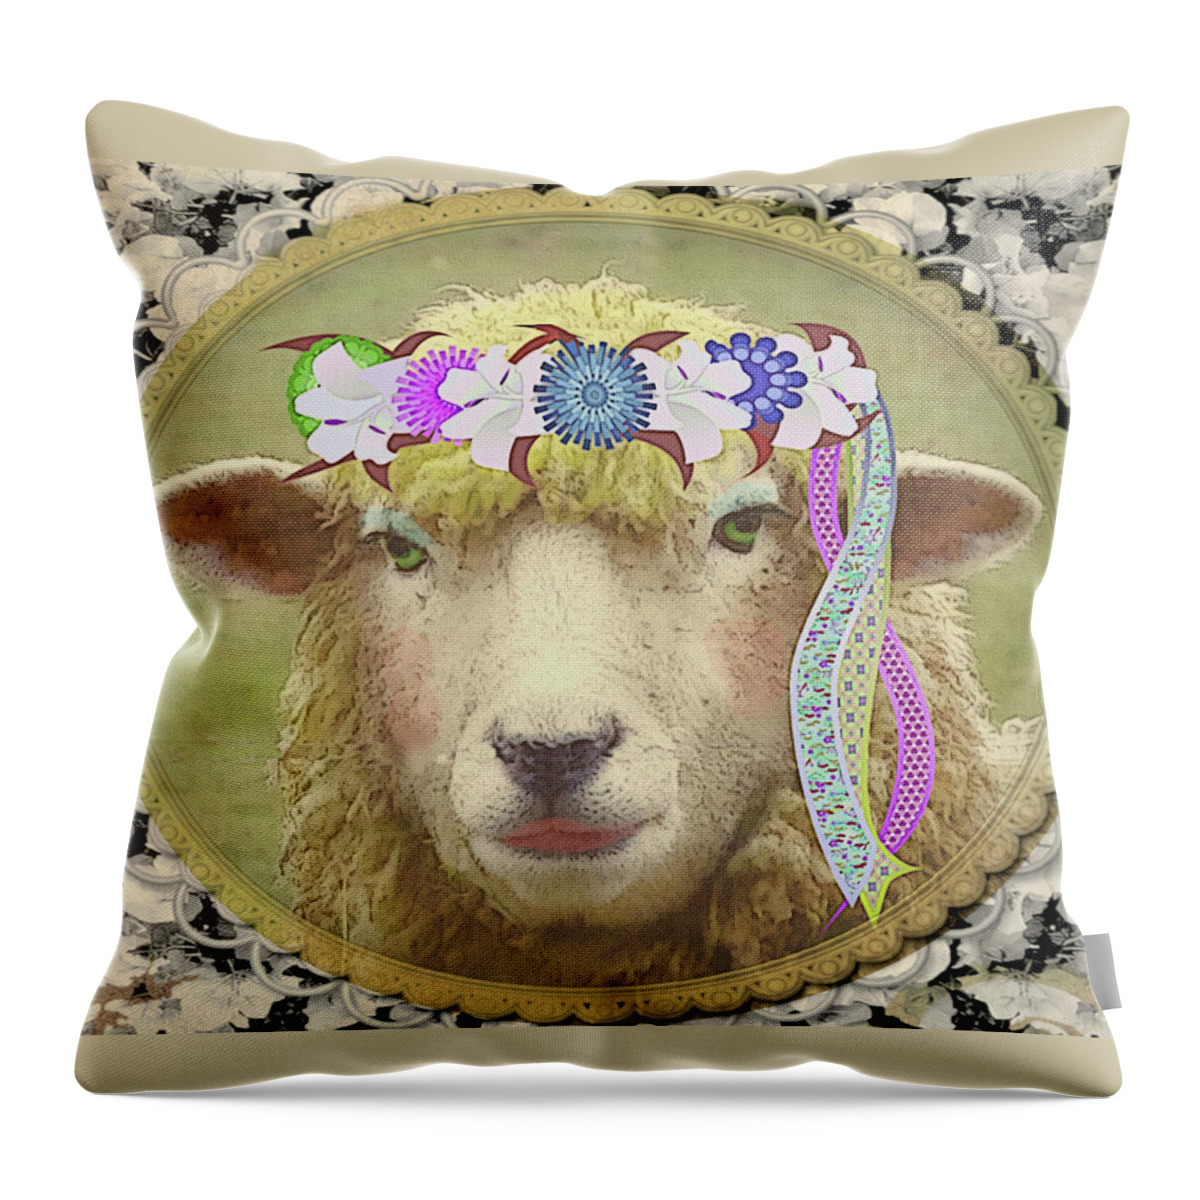 Vintage Style Throw Pillow featuring the mixed media G-lamb-orous Sheep by Shelli Fitzpatrick